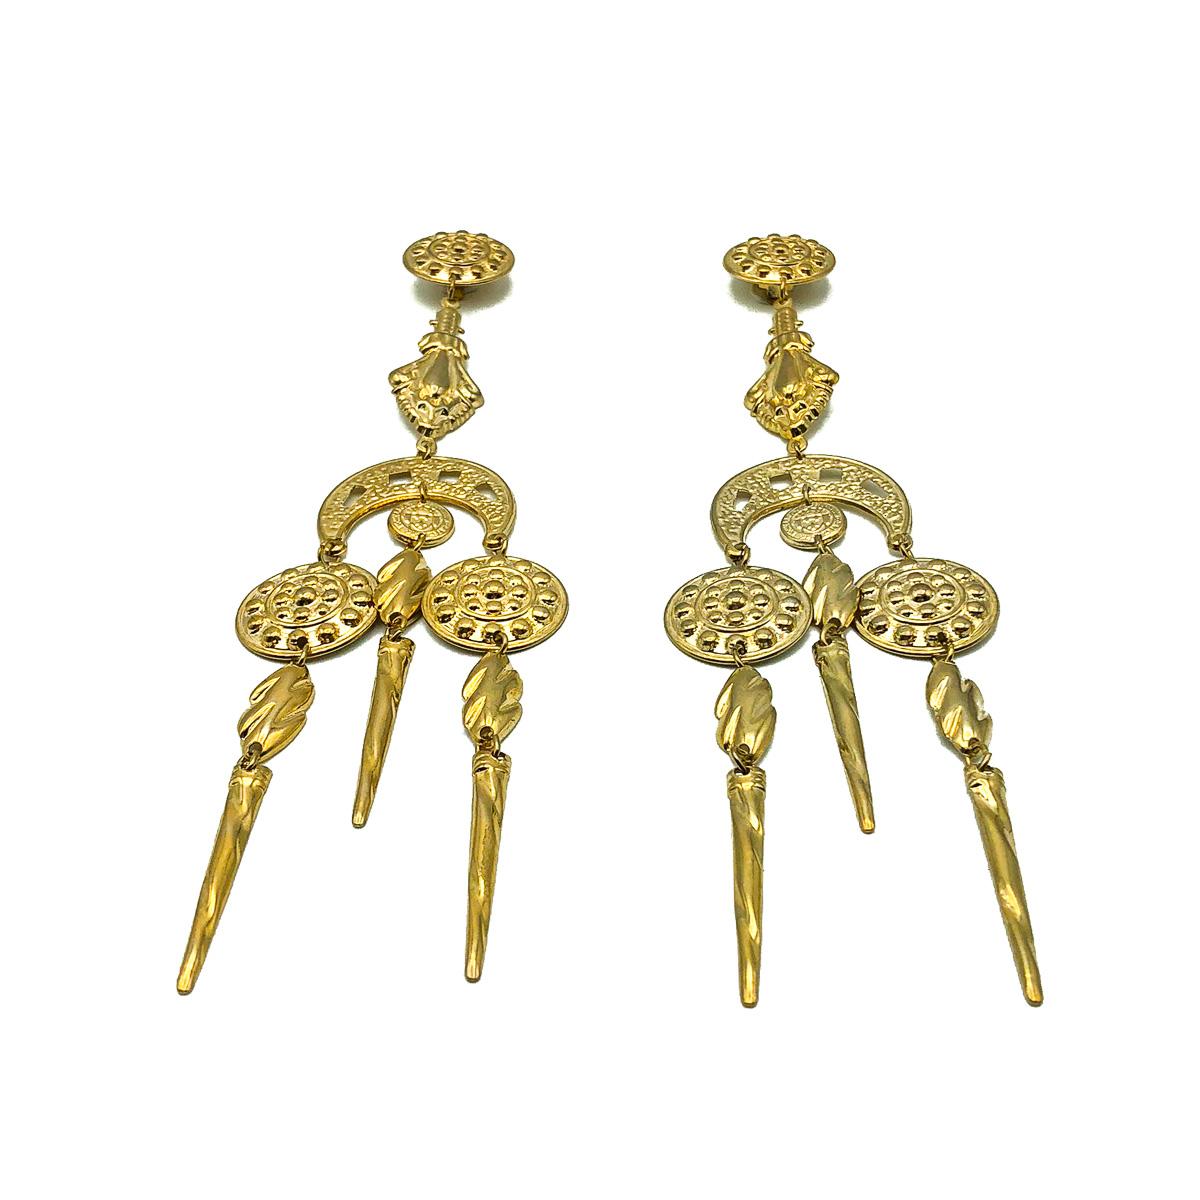 A seriously dramatic pair of Vintage Etruscan Chandelier Earrings. Featuring shoulder duster proportions and fabulous details with crescents, spires and circular motifs all wonderfully embellished. 
Vintage Condition: Very good without damage or